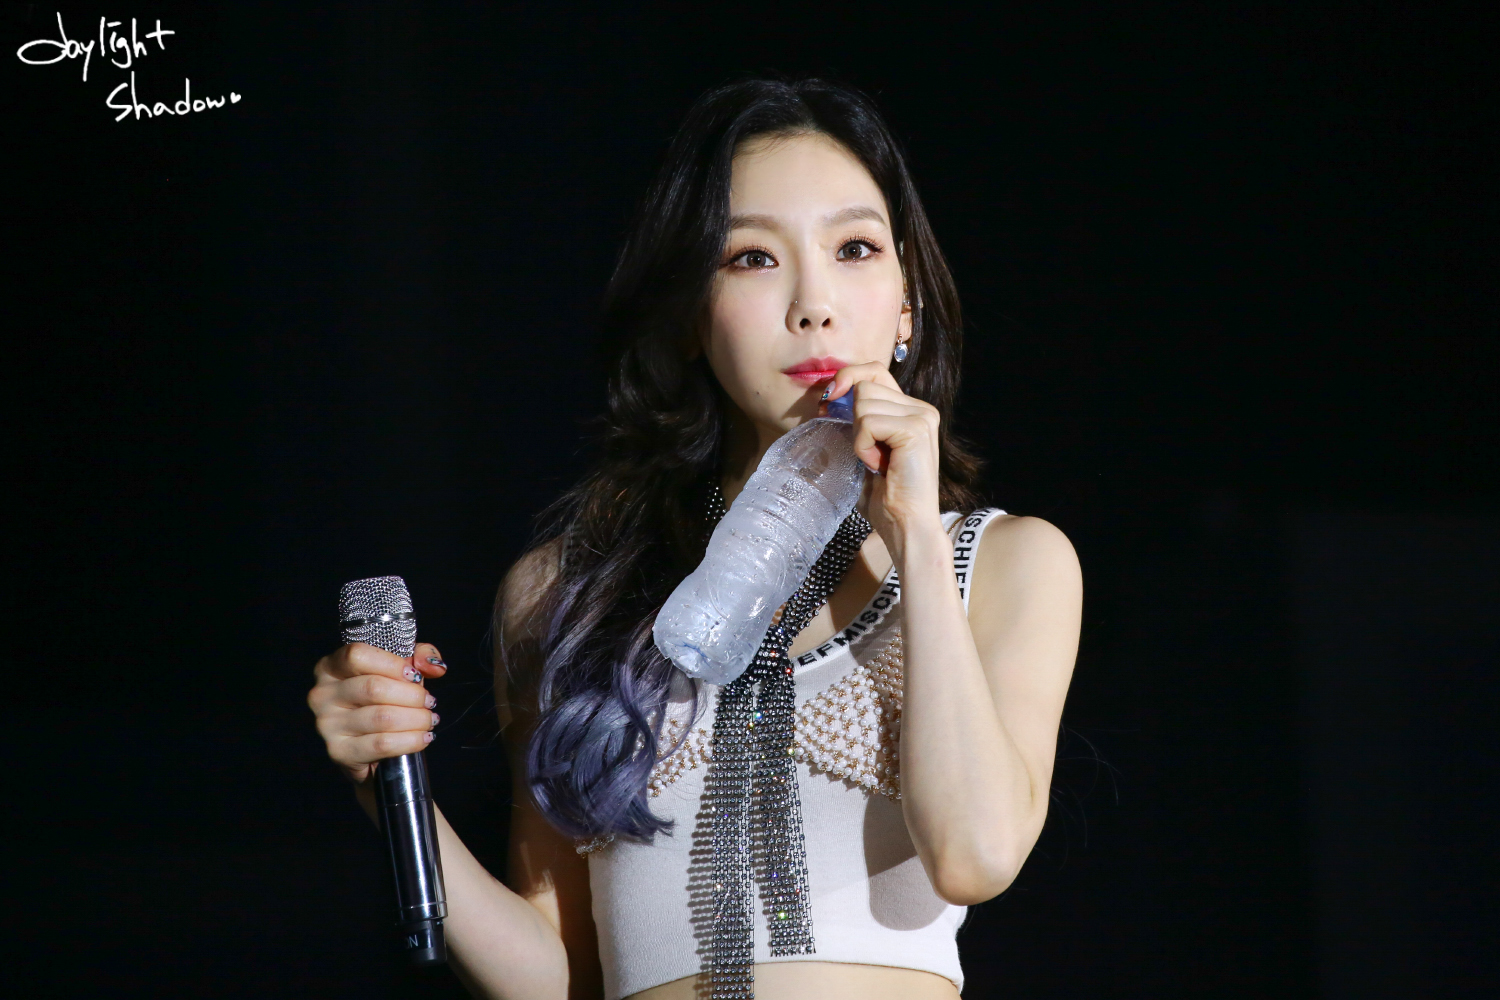 170610-11 PERSONA in Hong Kong 태연 by DAYL!GHT SHADOW (10).jpg